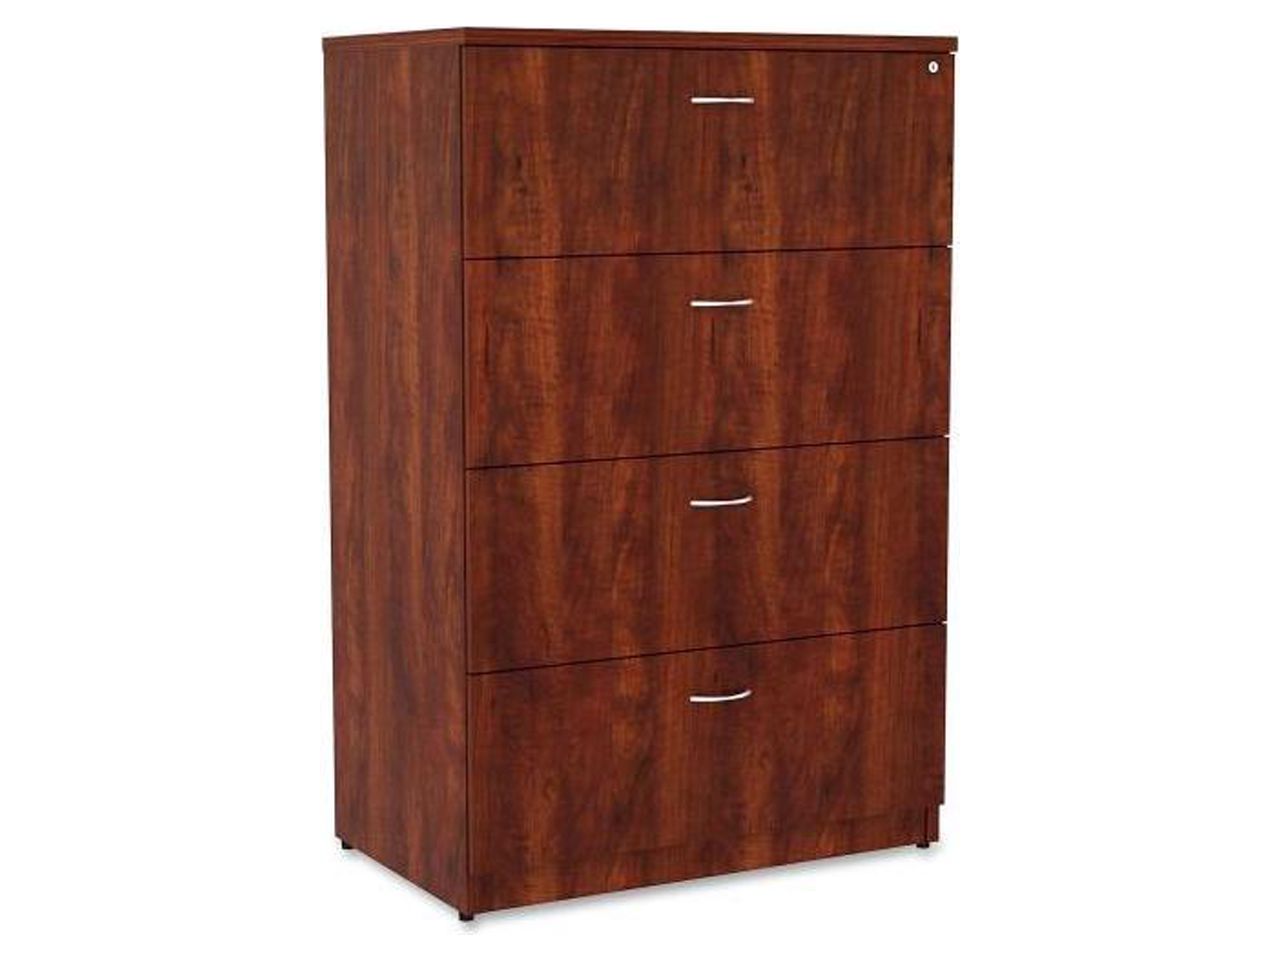 Lorell 4-Drawer Lateral File 35-1/2"x22"x54-3/4" Cherry 34387 - image 2 of 5